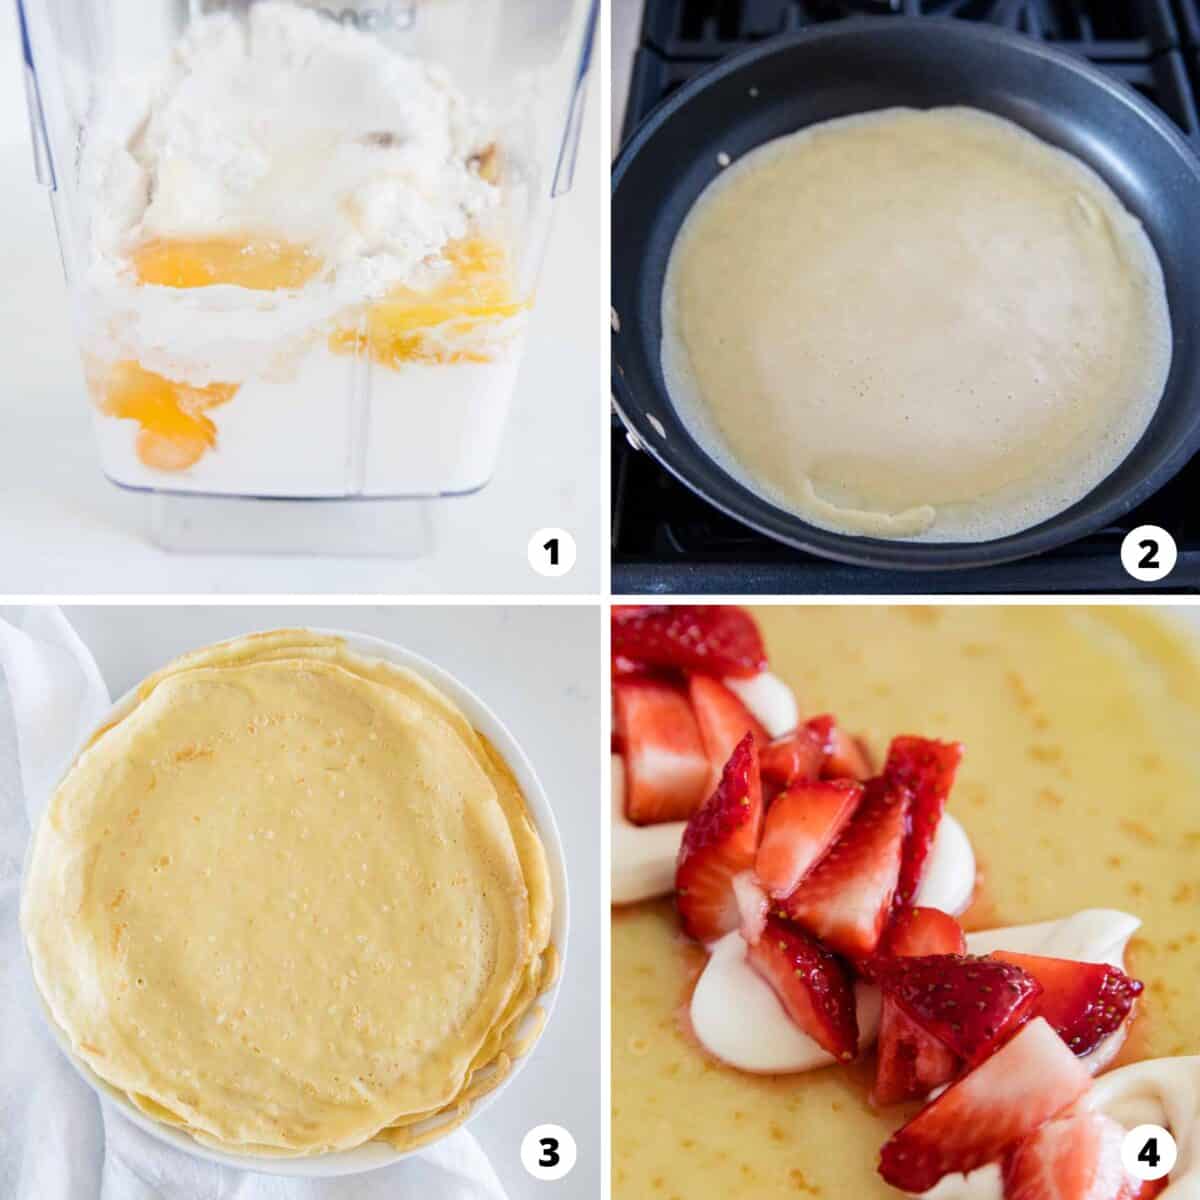 The process of showing how to make crepes in a 4 step collage. 